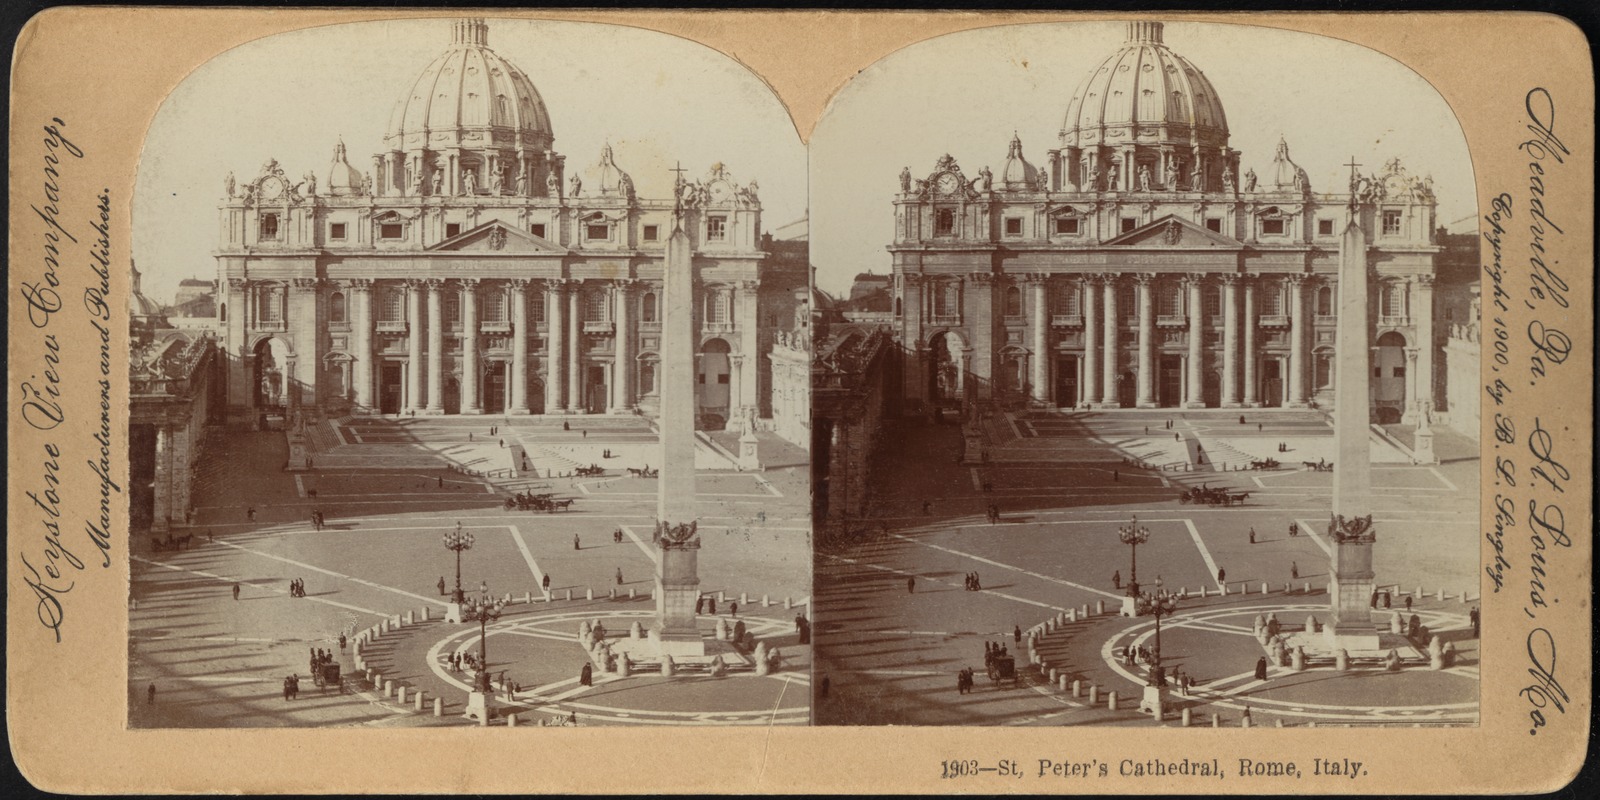 St. Peter's Cathedral, Rome, Italy